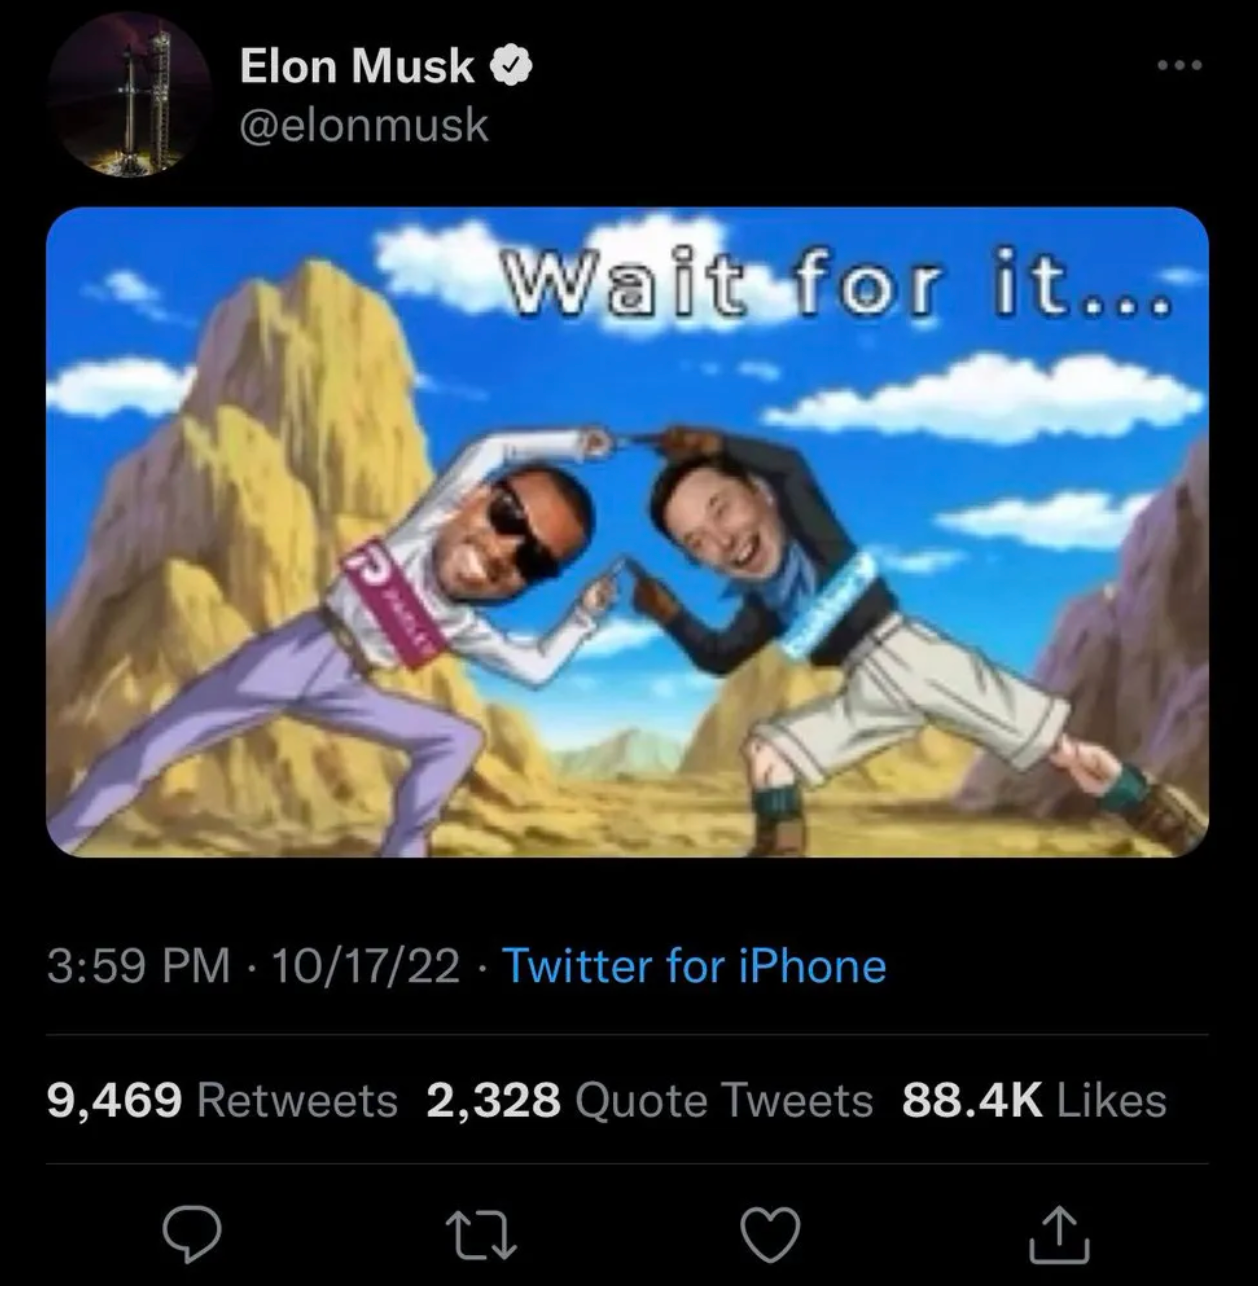 Elon Musk tweets his support for Kanye West after the rapper made antisemitic remarks. He later deleted it